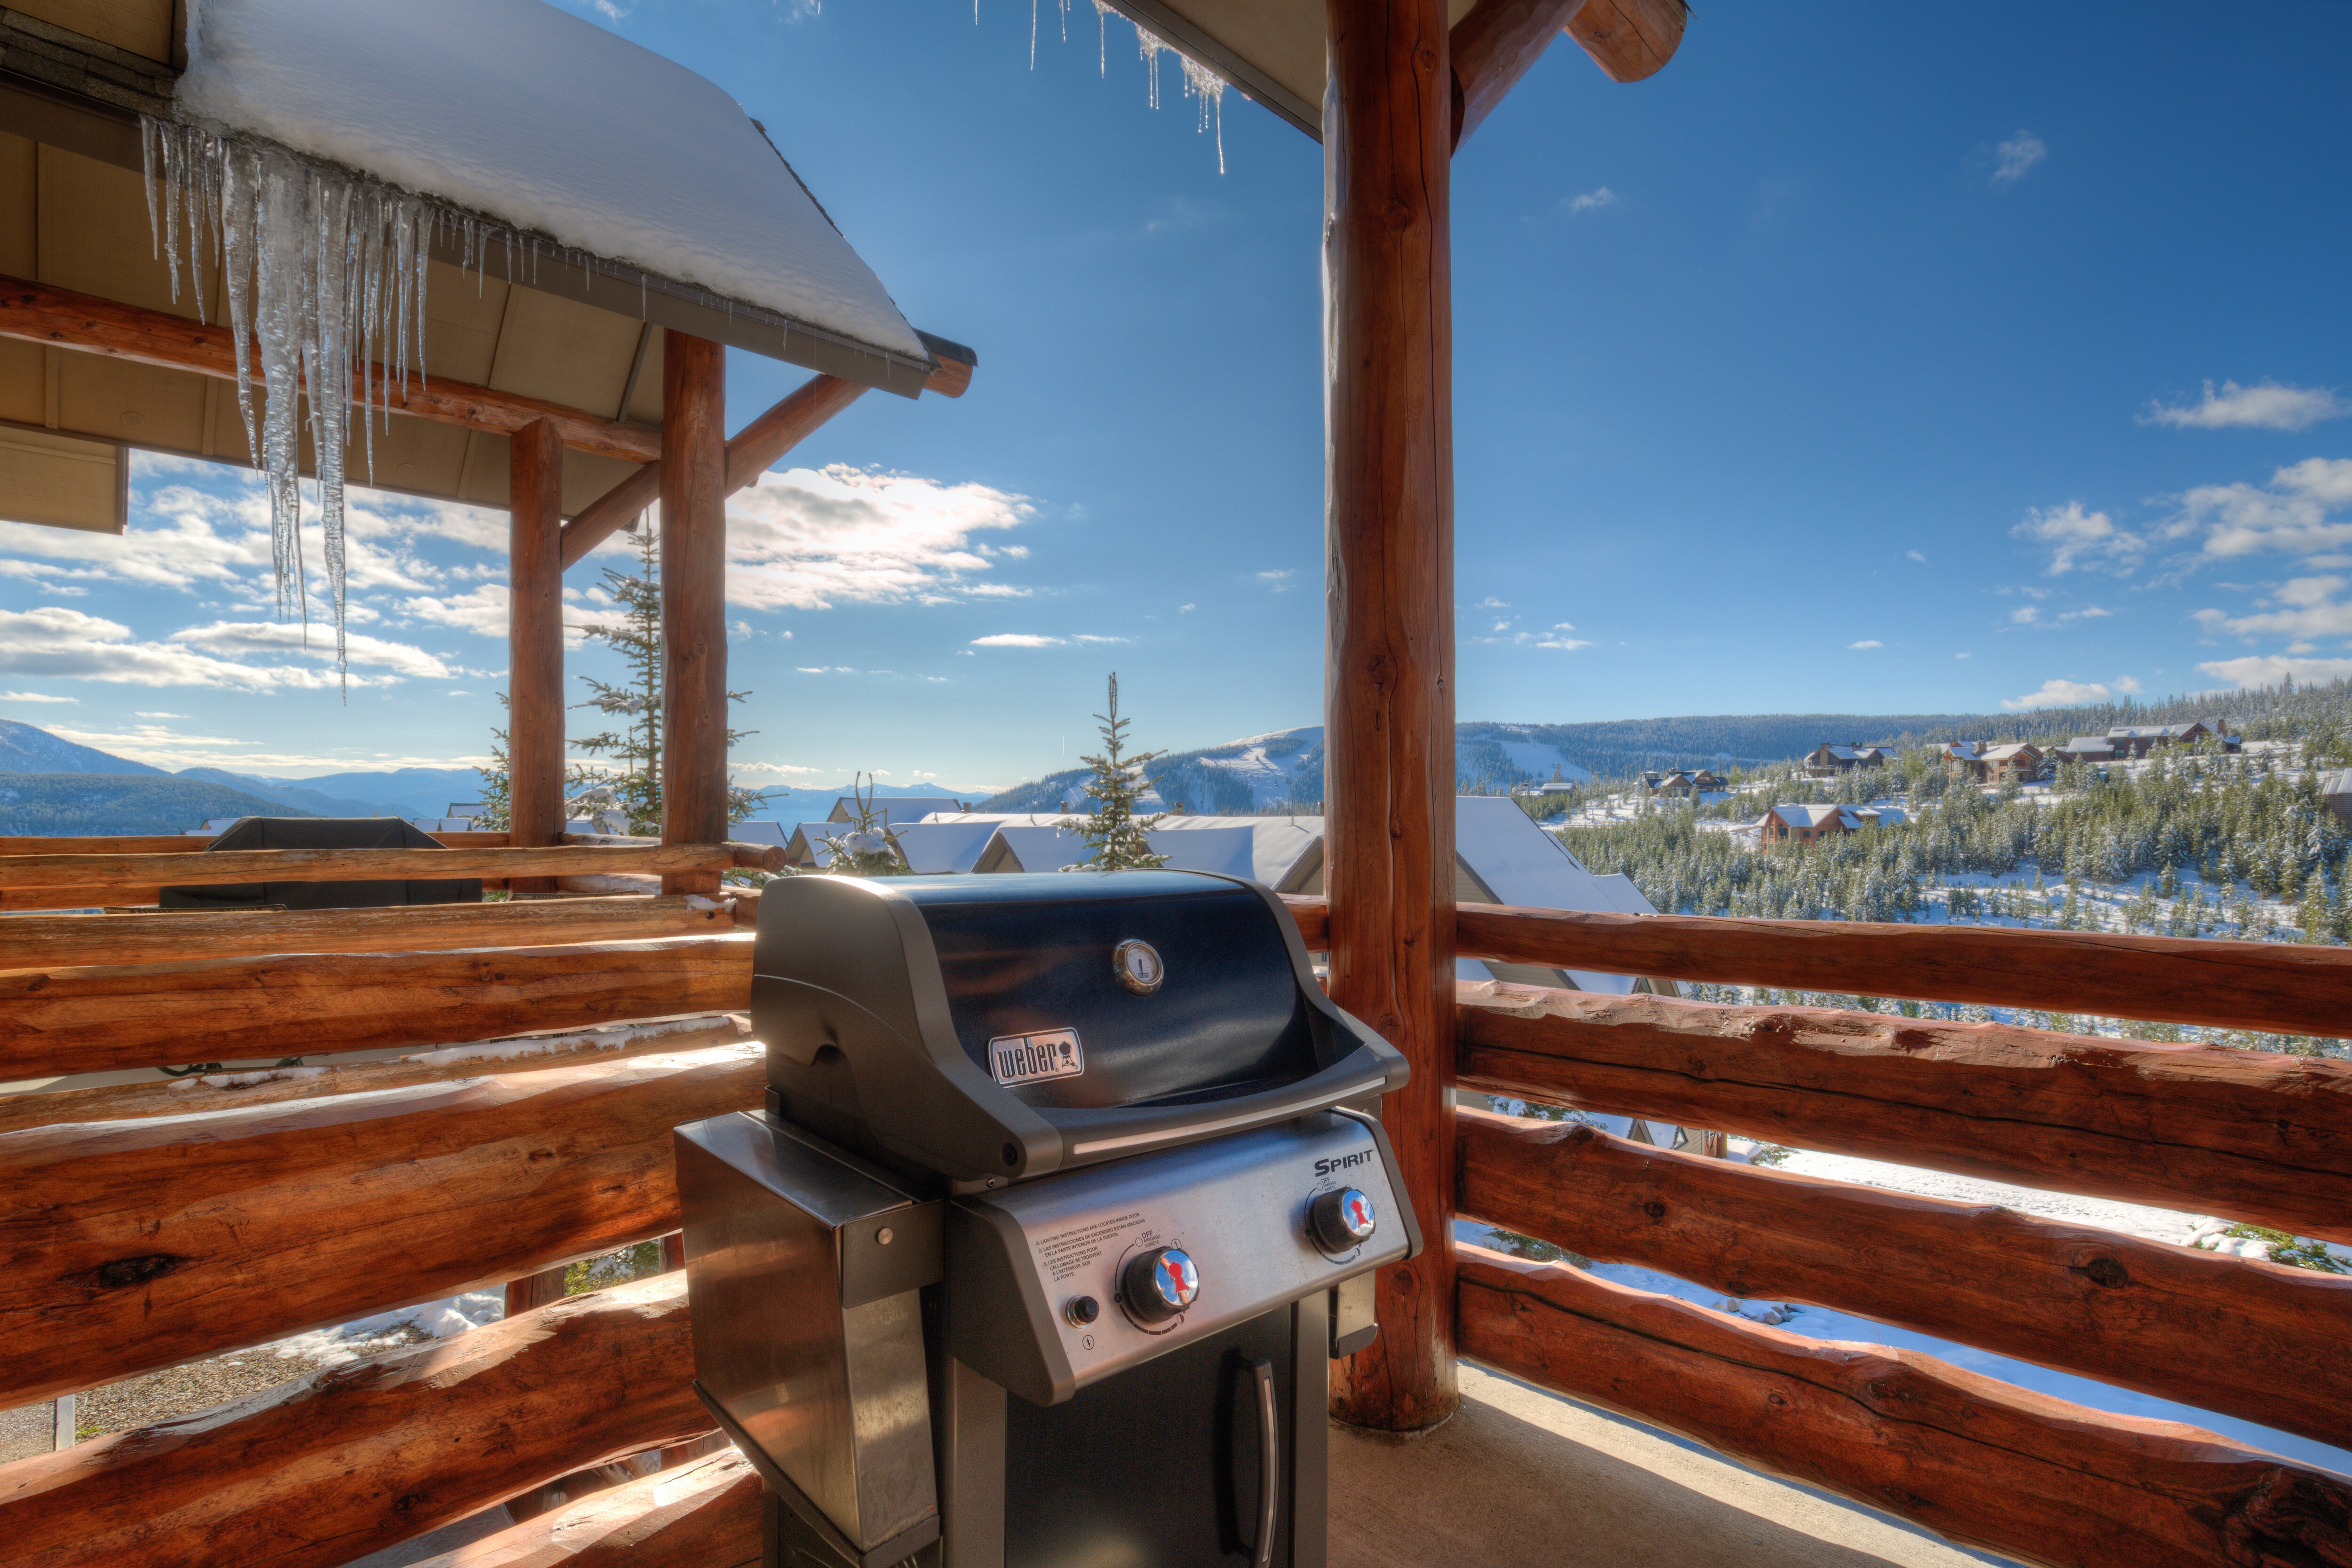 Enjoy grilling out in the summer | Exterior